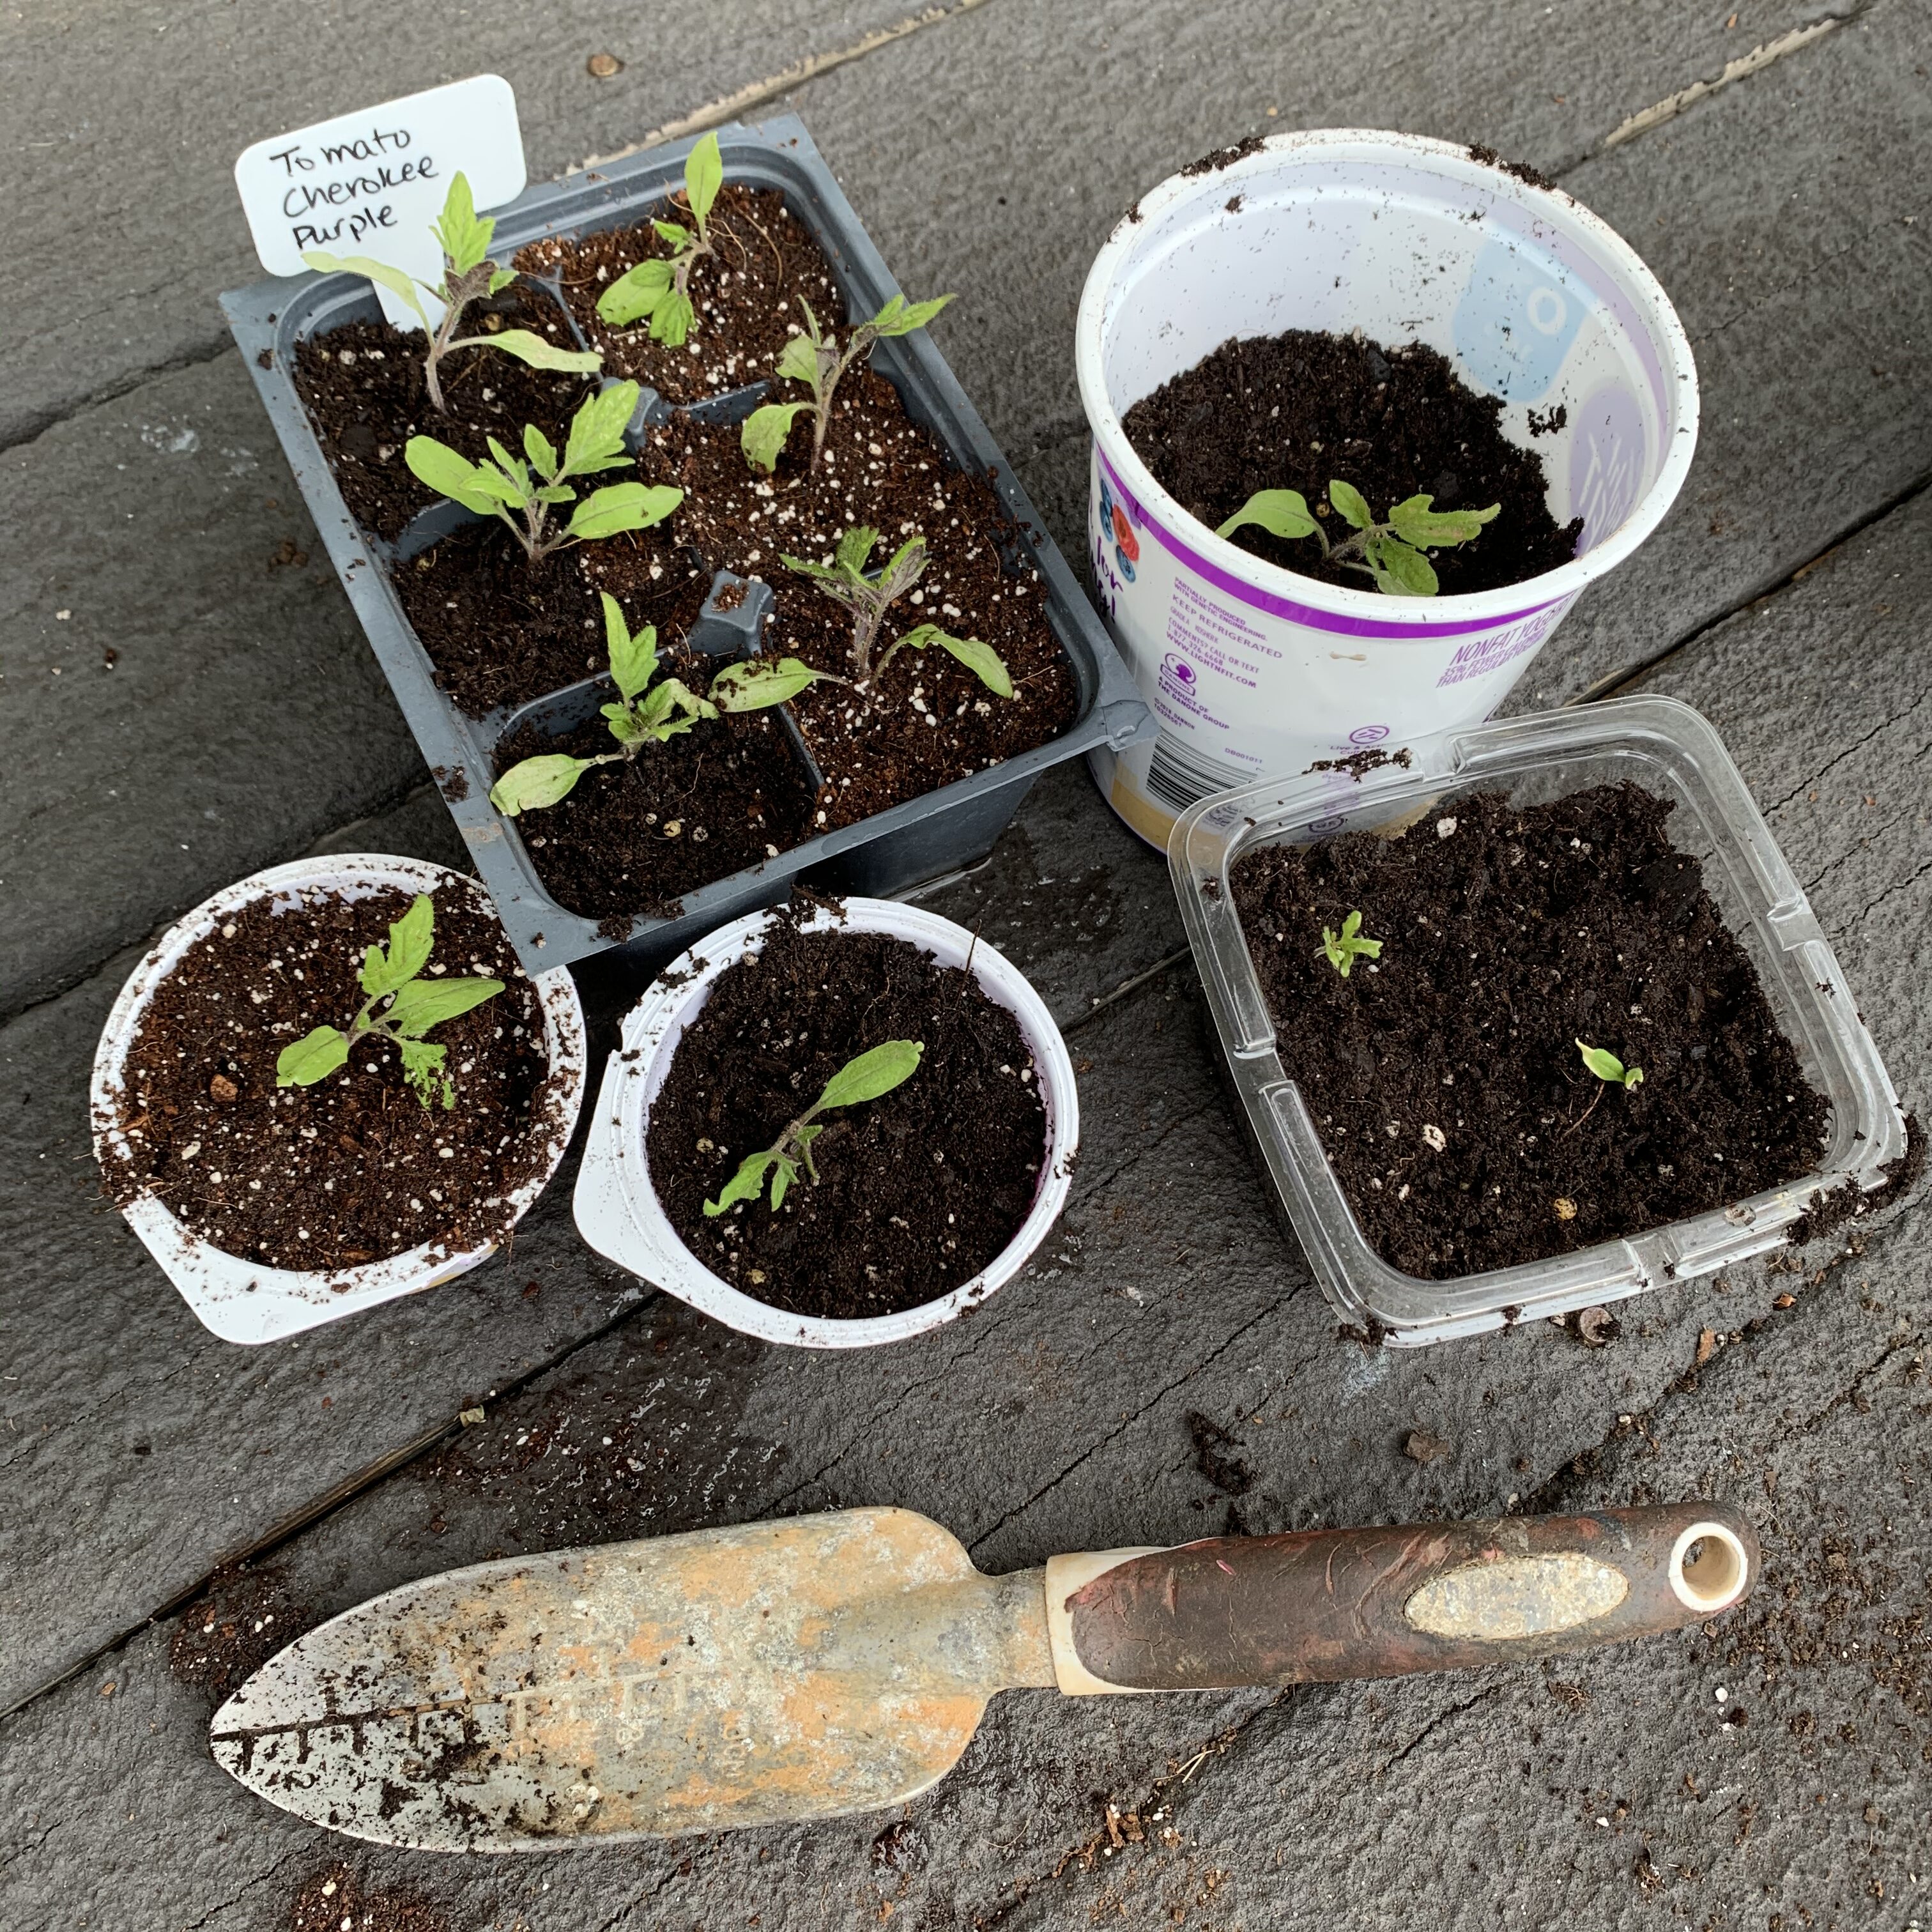 05F5679A 19B0 4262 8122 C3A00AAF080D Comparing Burpee Organic Seed Starting Mix vs Miracle Gro Moisture Control Potting Mix for transplanted tomato seedlings